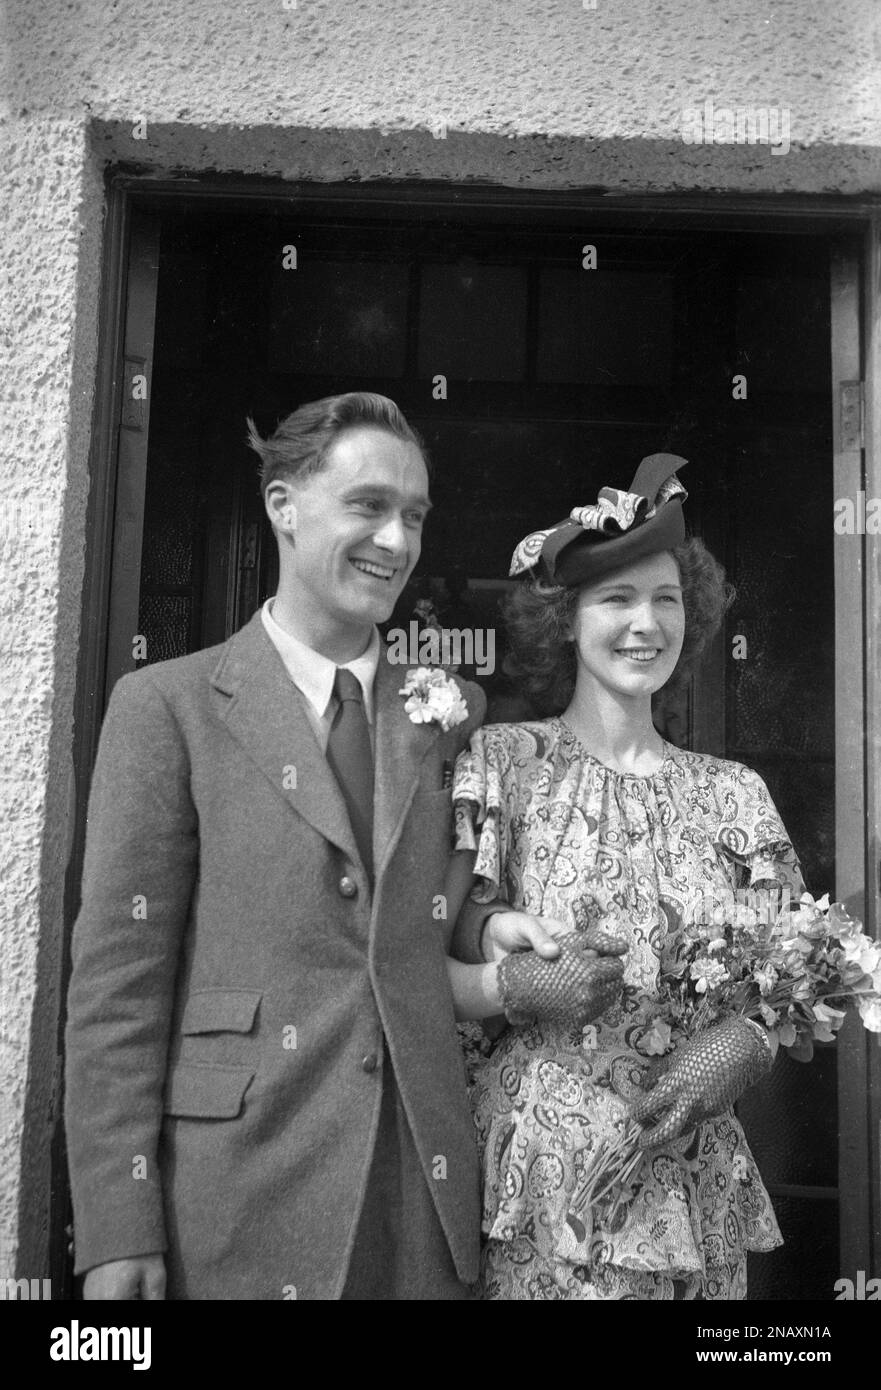 1950s, historical, a recently married couple, standing together in a doorway, smiling, happy and holding hands, the woman wearing lace gloves, floral dress and pretty hat, England, UK. Stock Photo